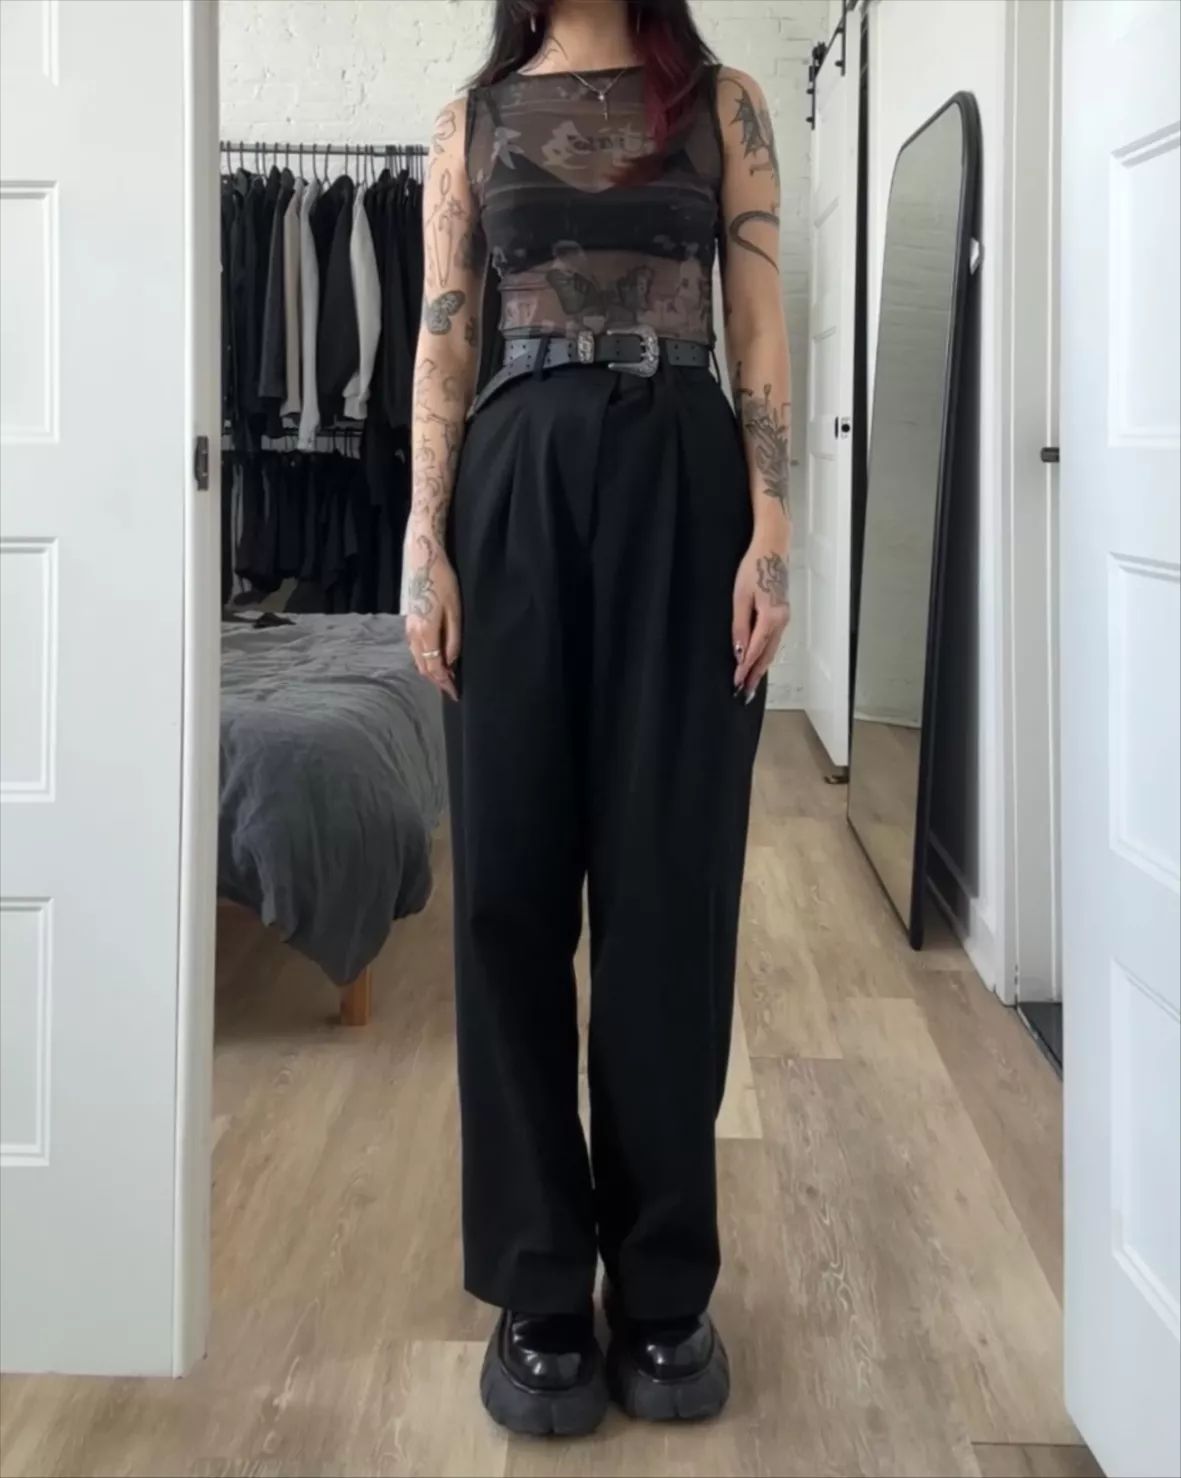 Wide-Fit Pleated Pants